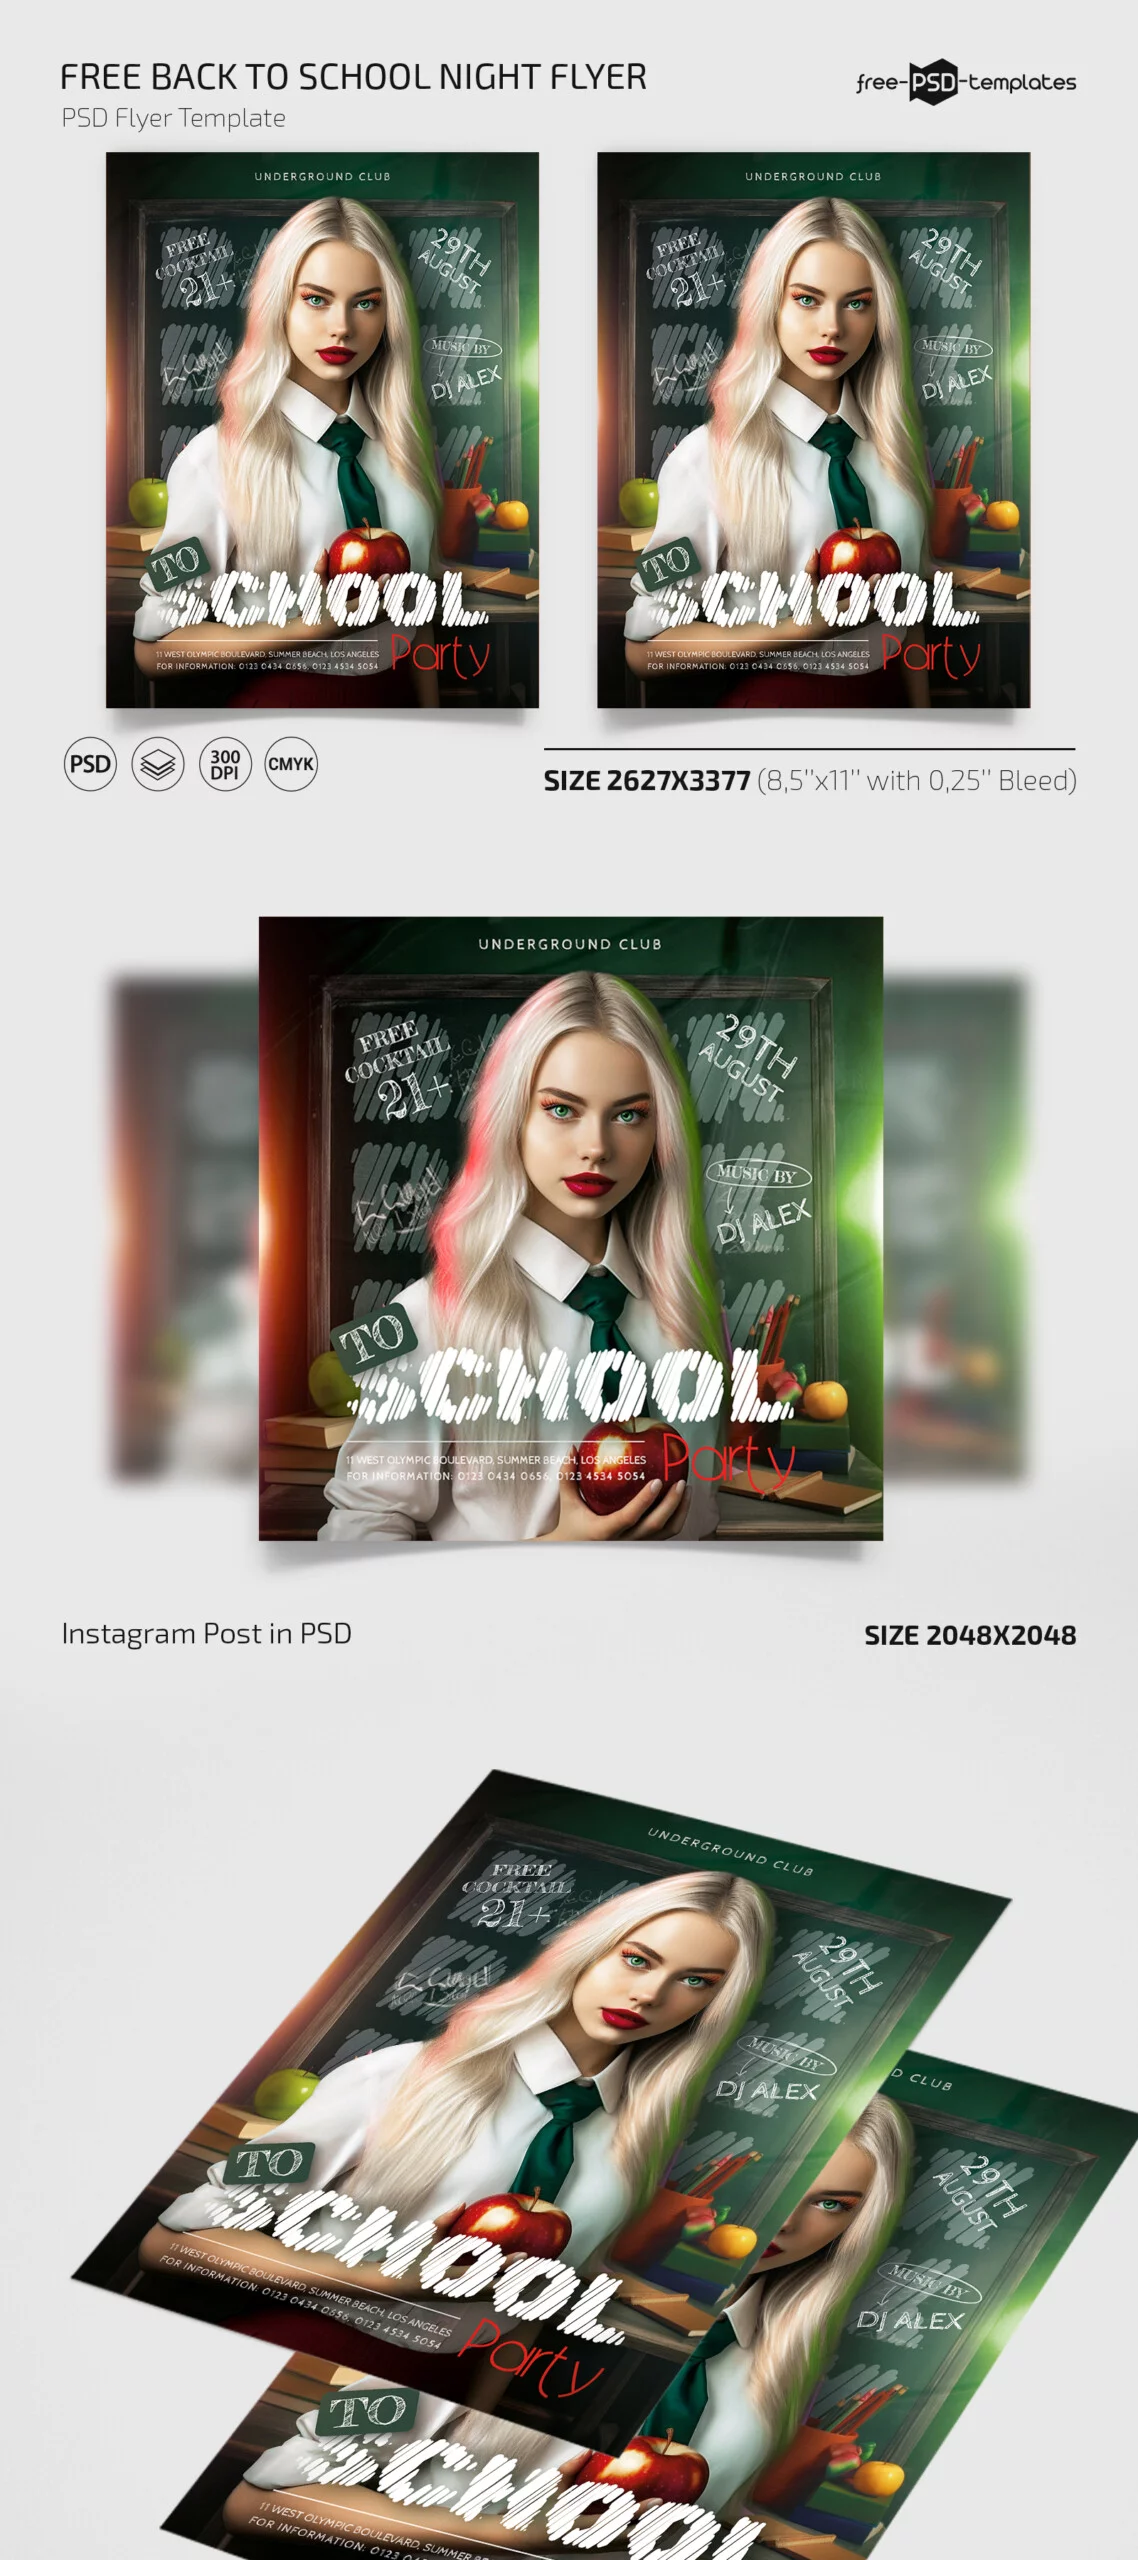 Free Back to School Night Flyer PSD Template